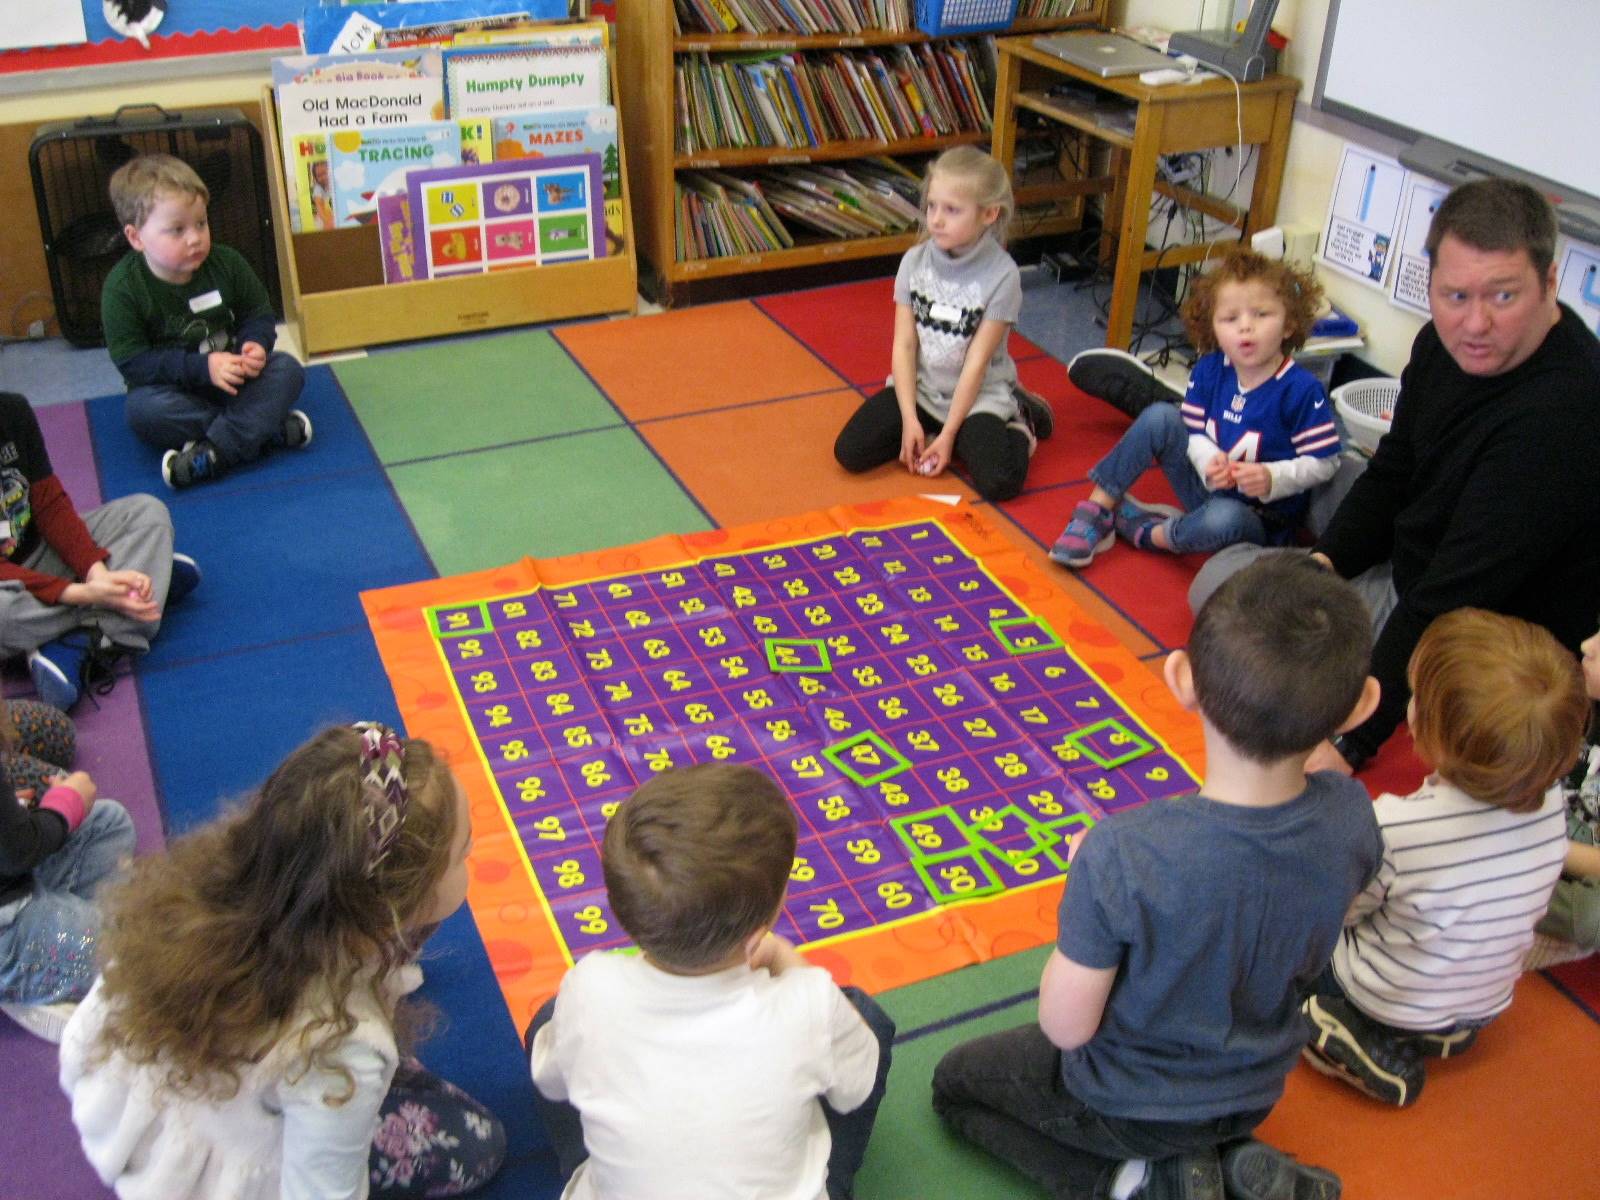 A teacher plays 100 day math game with students.